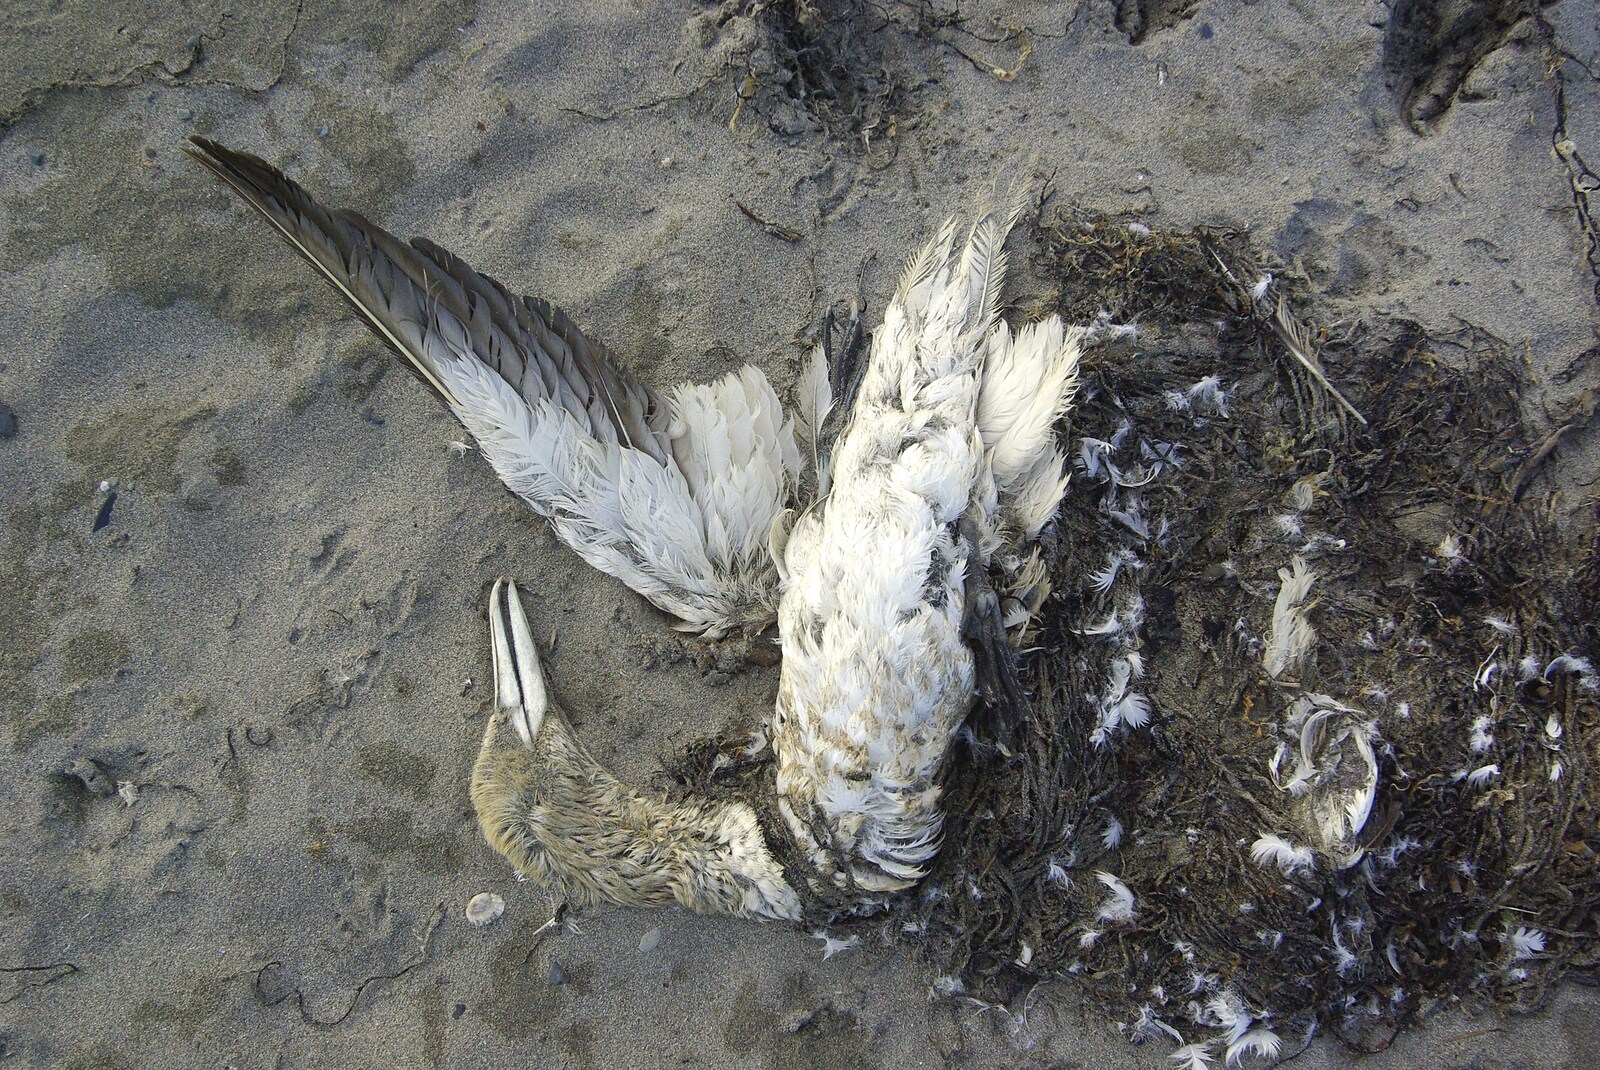 30th Birthday Party in Kilkee, County Clare, Ireland - 22nd September 2007: On Kilkee beach: a dead and decaying sea-bird